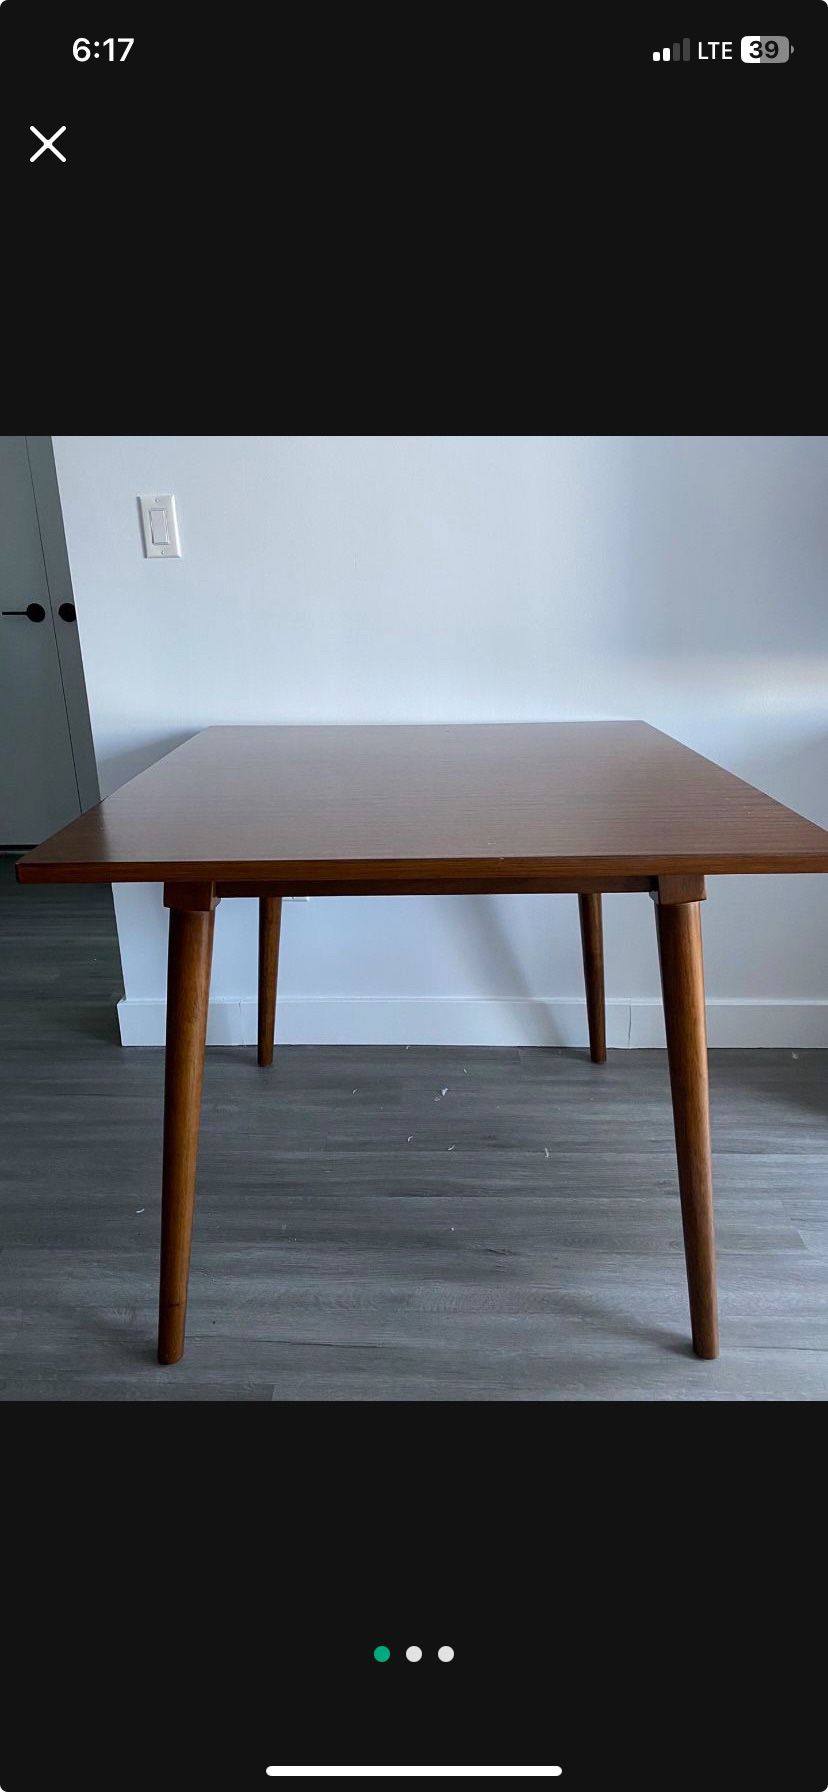 Solid Wood Square Table